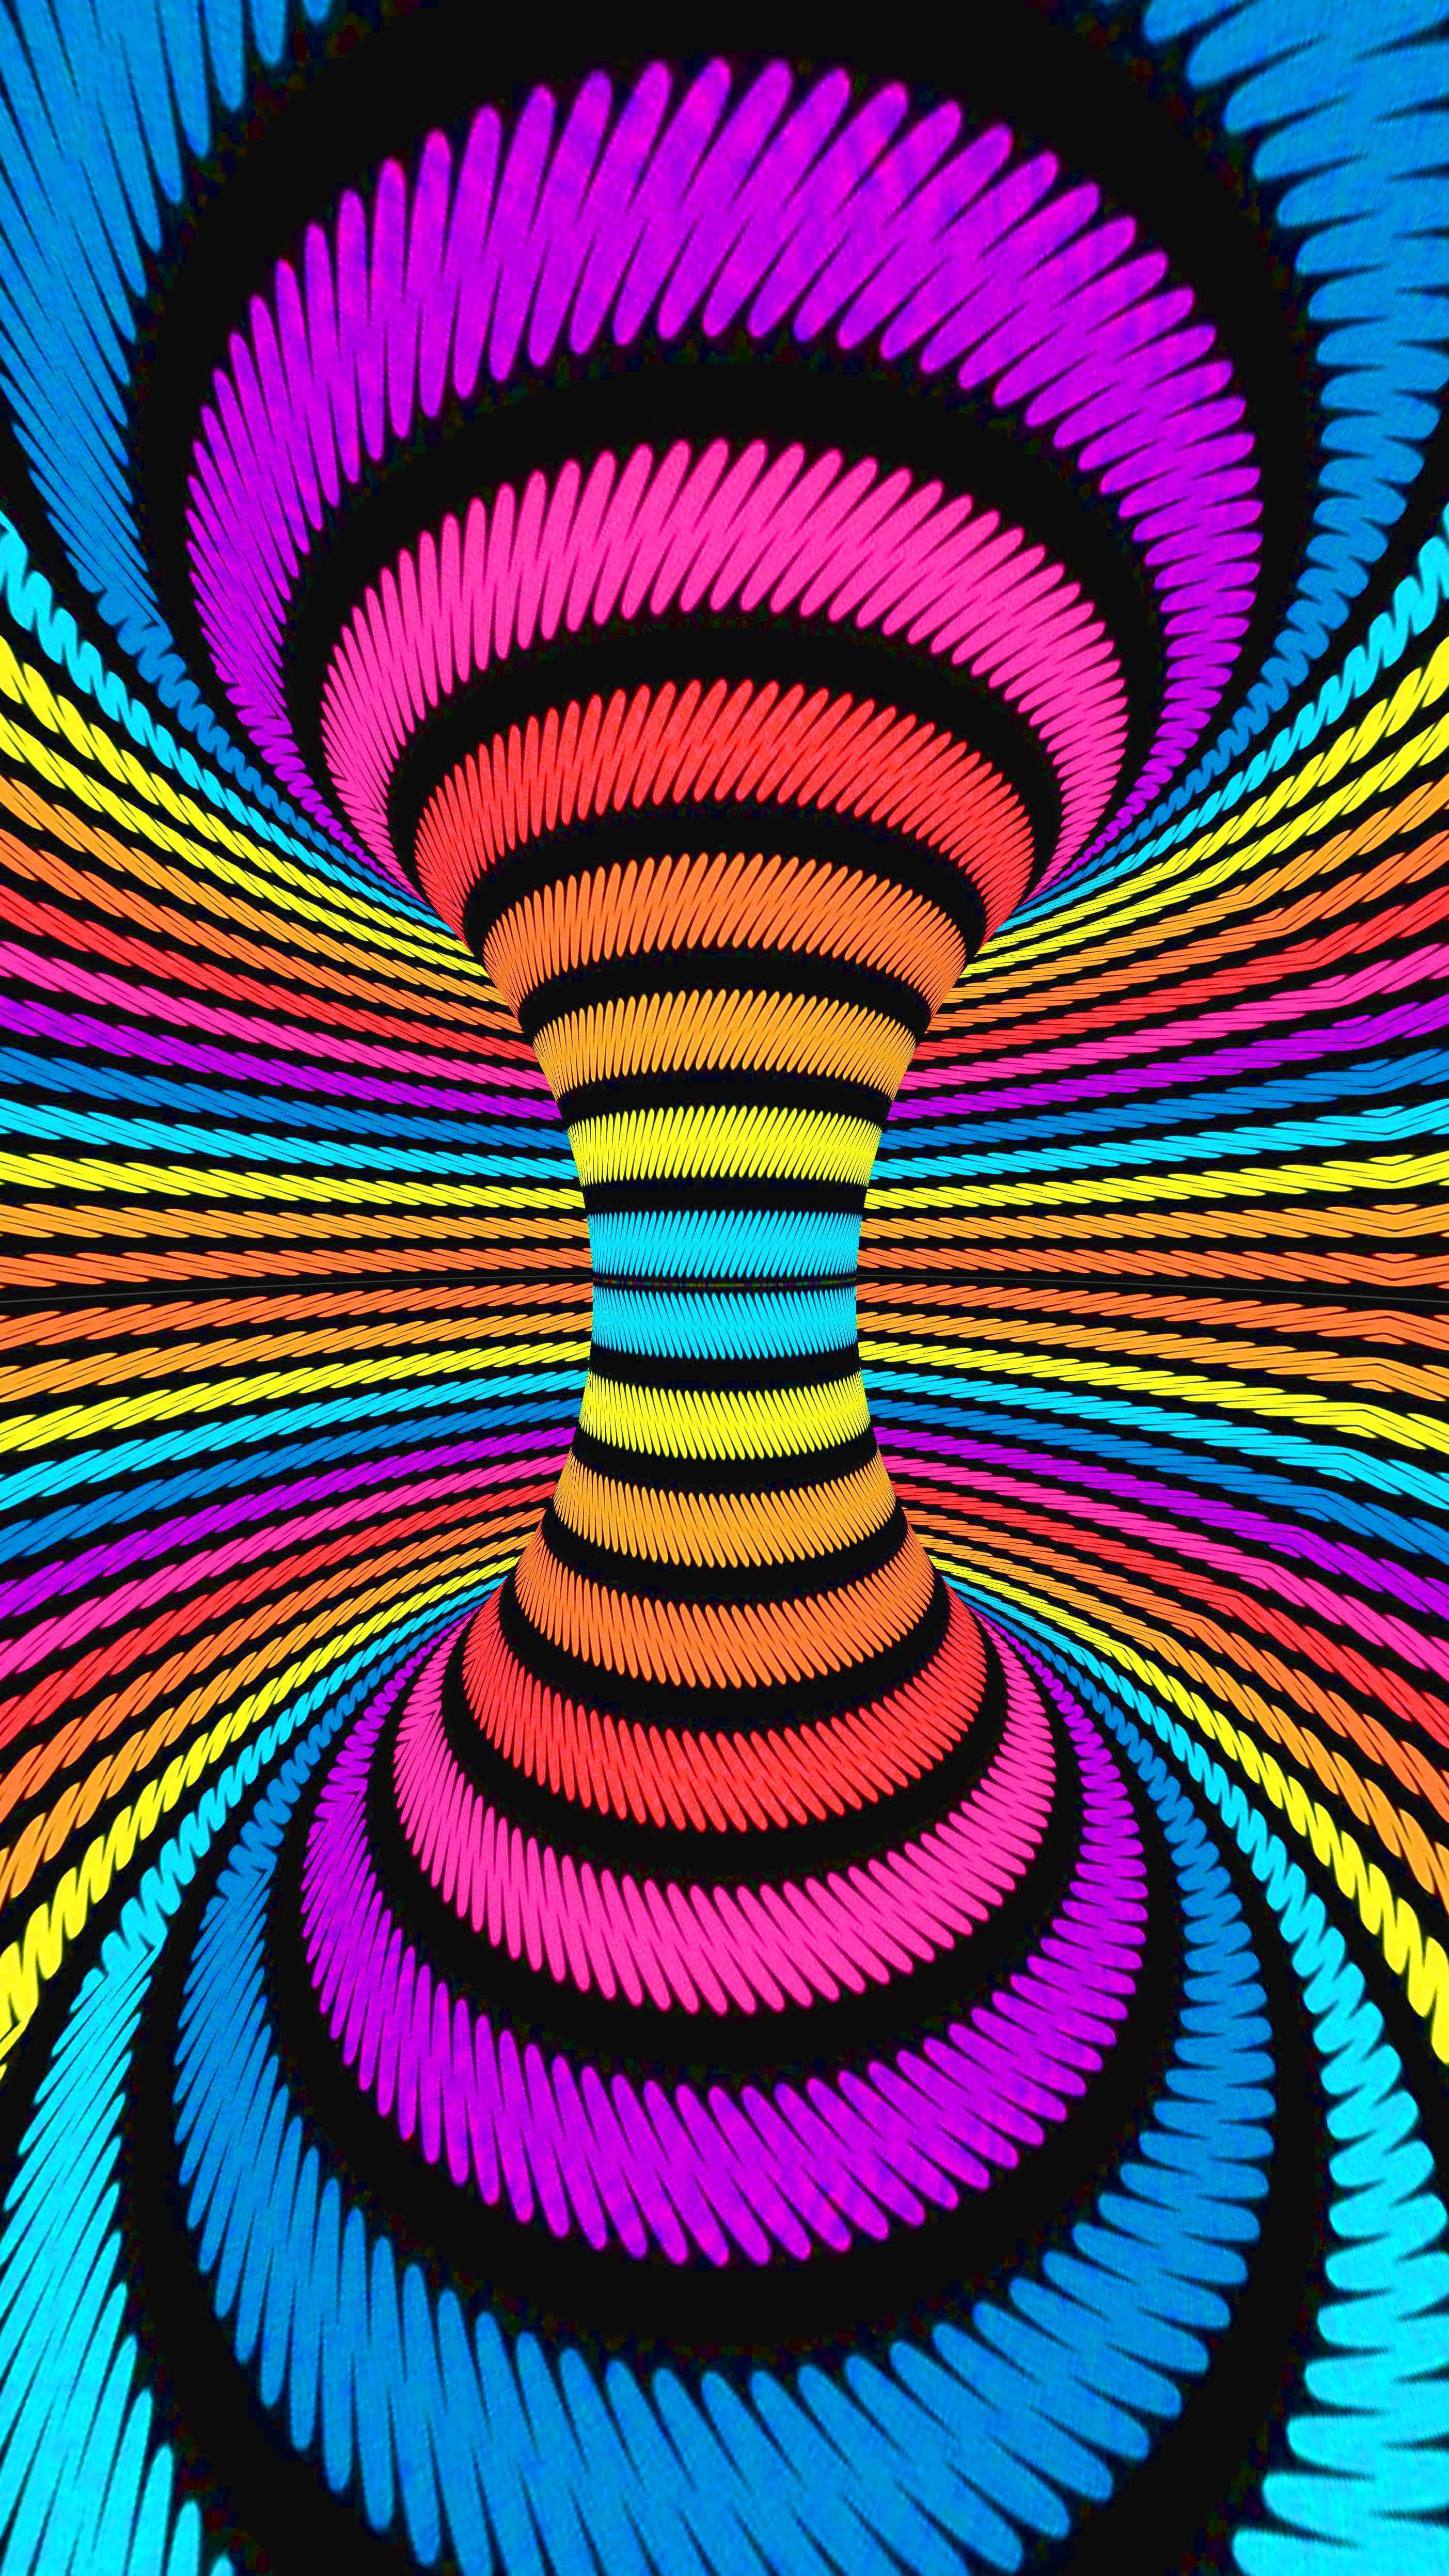 An abstract colorful spiral pattern with lines - Weirdcore